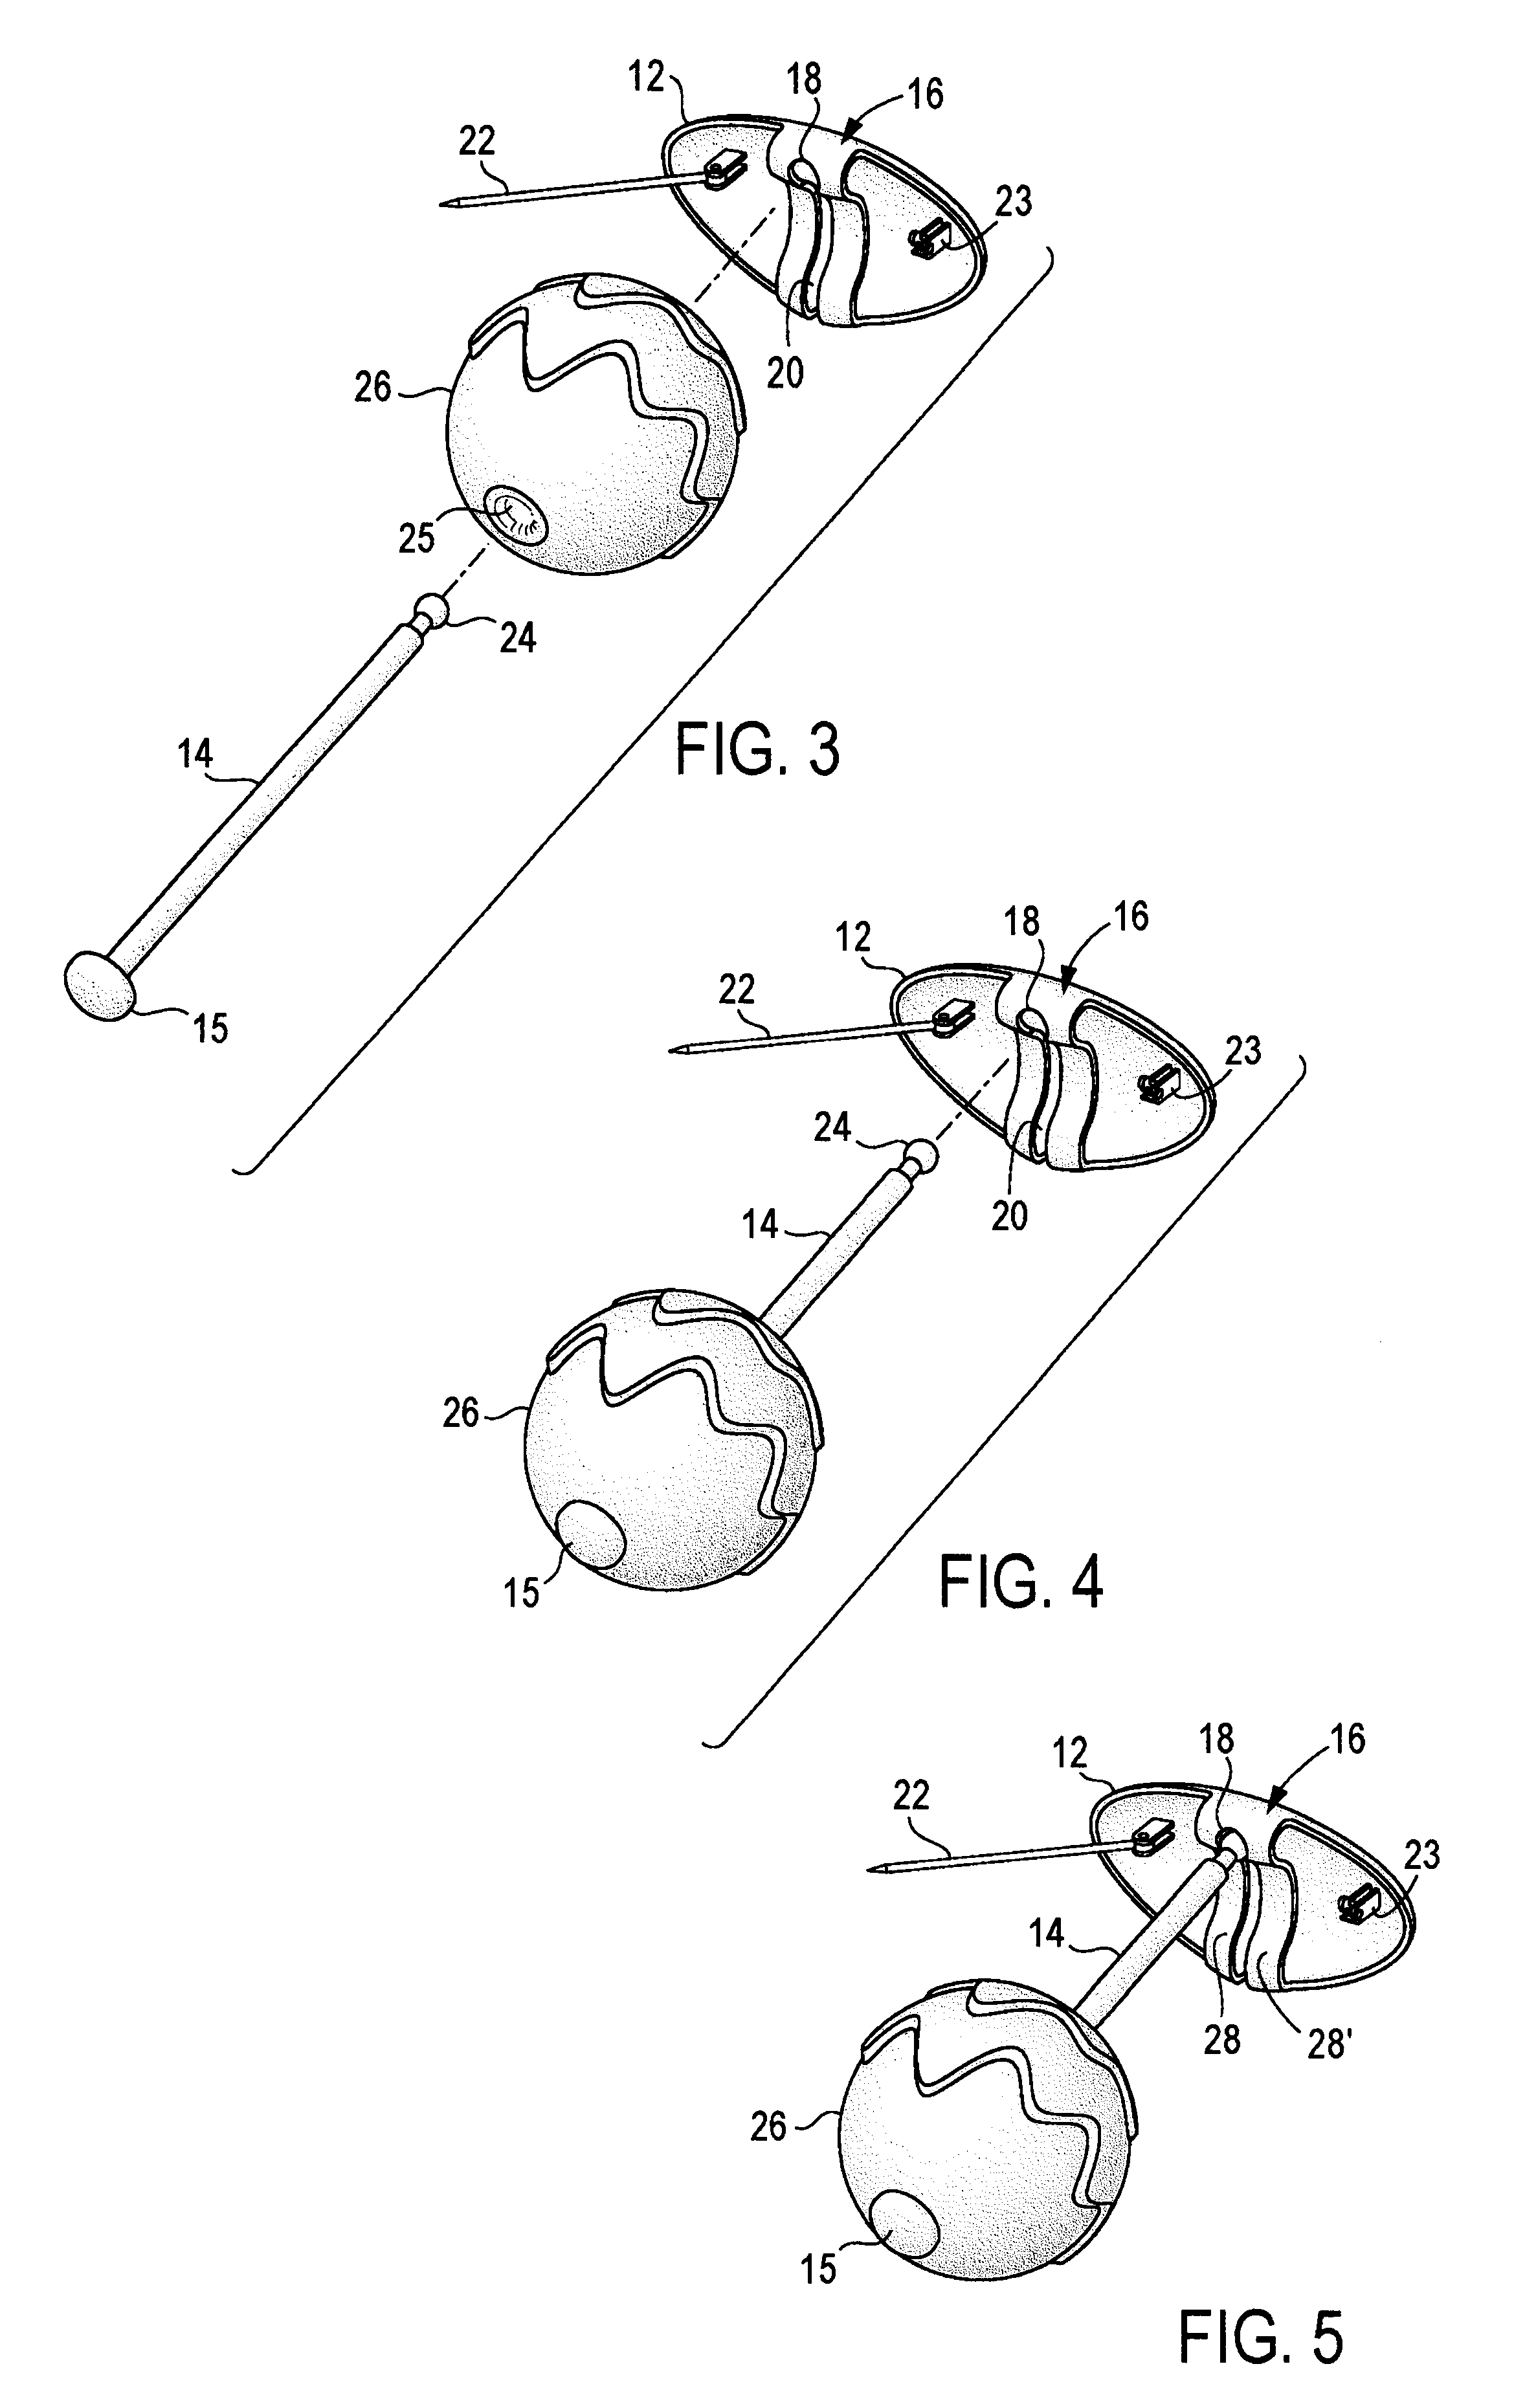 Interchangeable ornament display jewelry apparatus